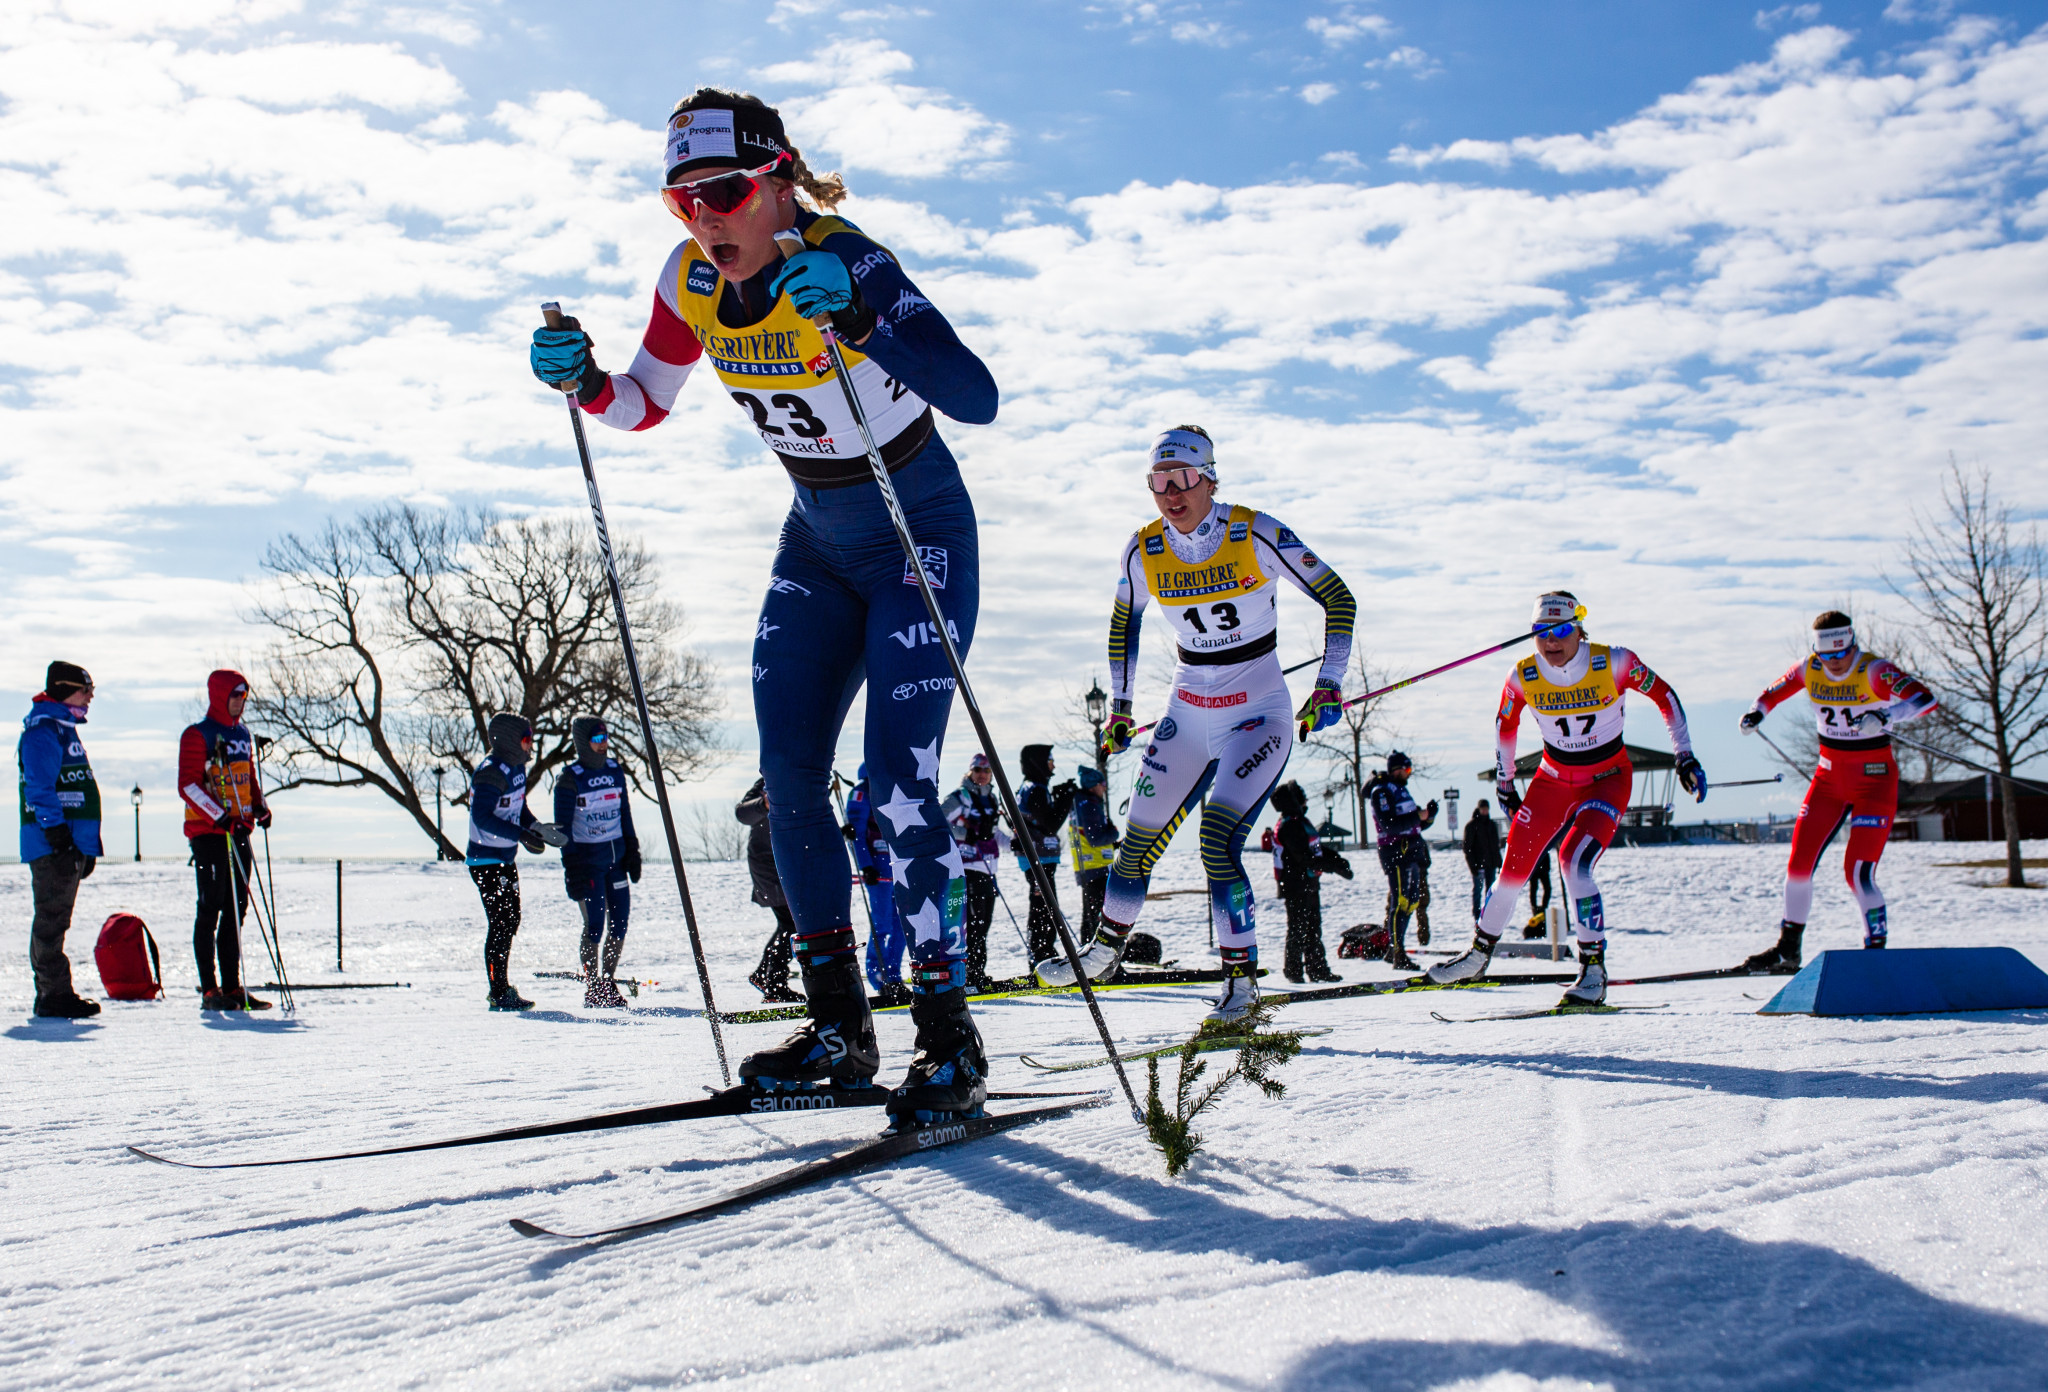 Jeff Ellis will oversee Nordiq Canada's annual events calendar, which will include International Ski Federation Cross Country Ski World Cup ©Getty Images